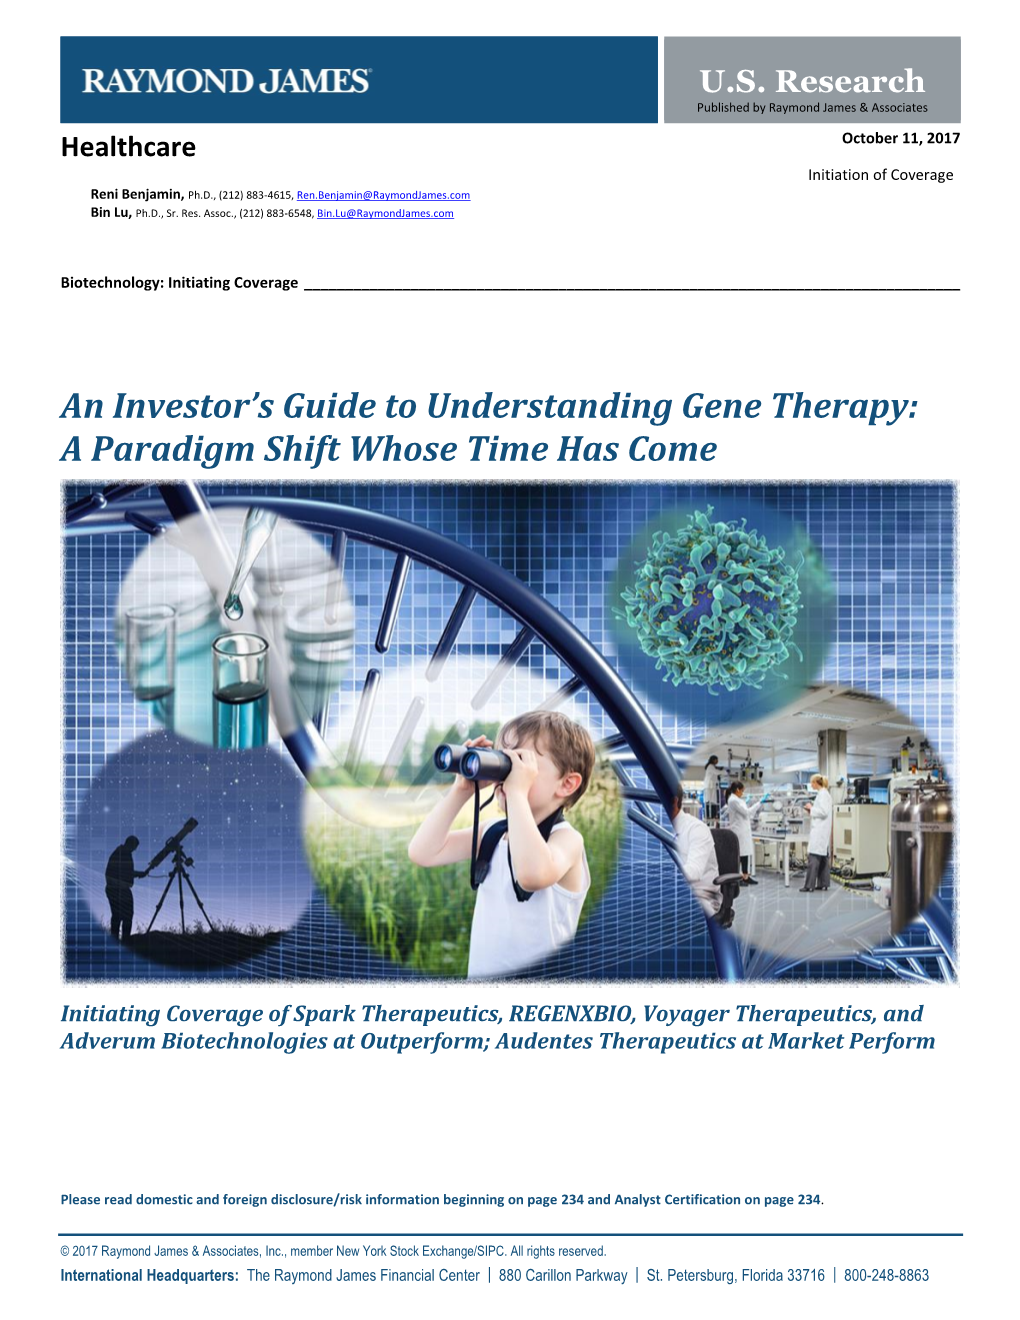 An Investor's Guide to Understanding Gene Therapy